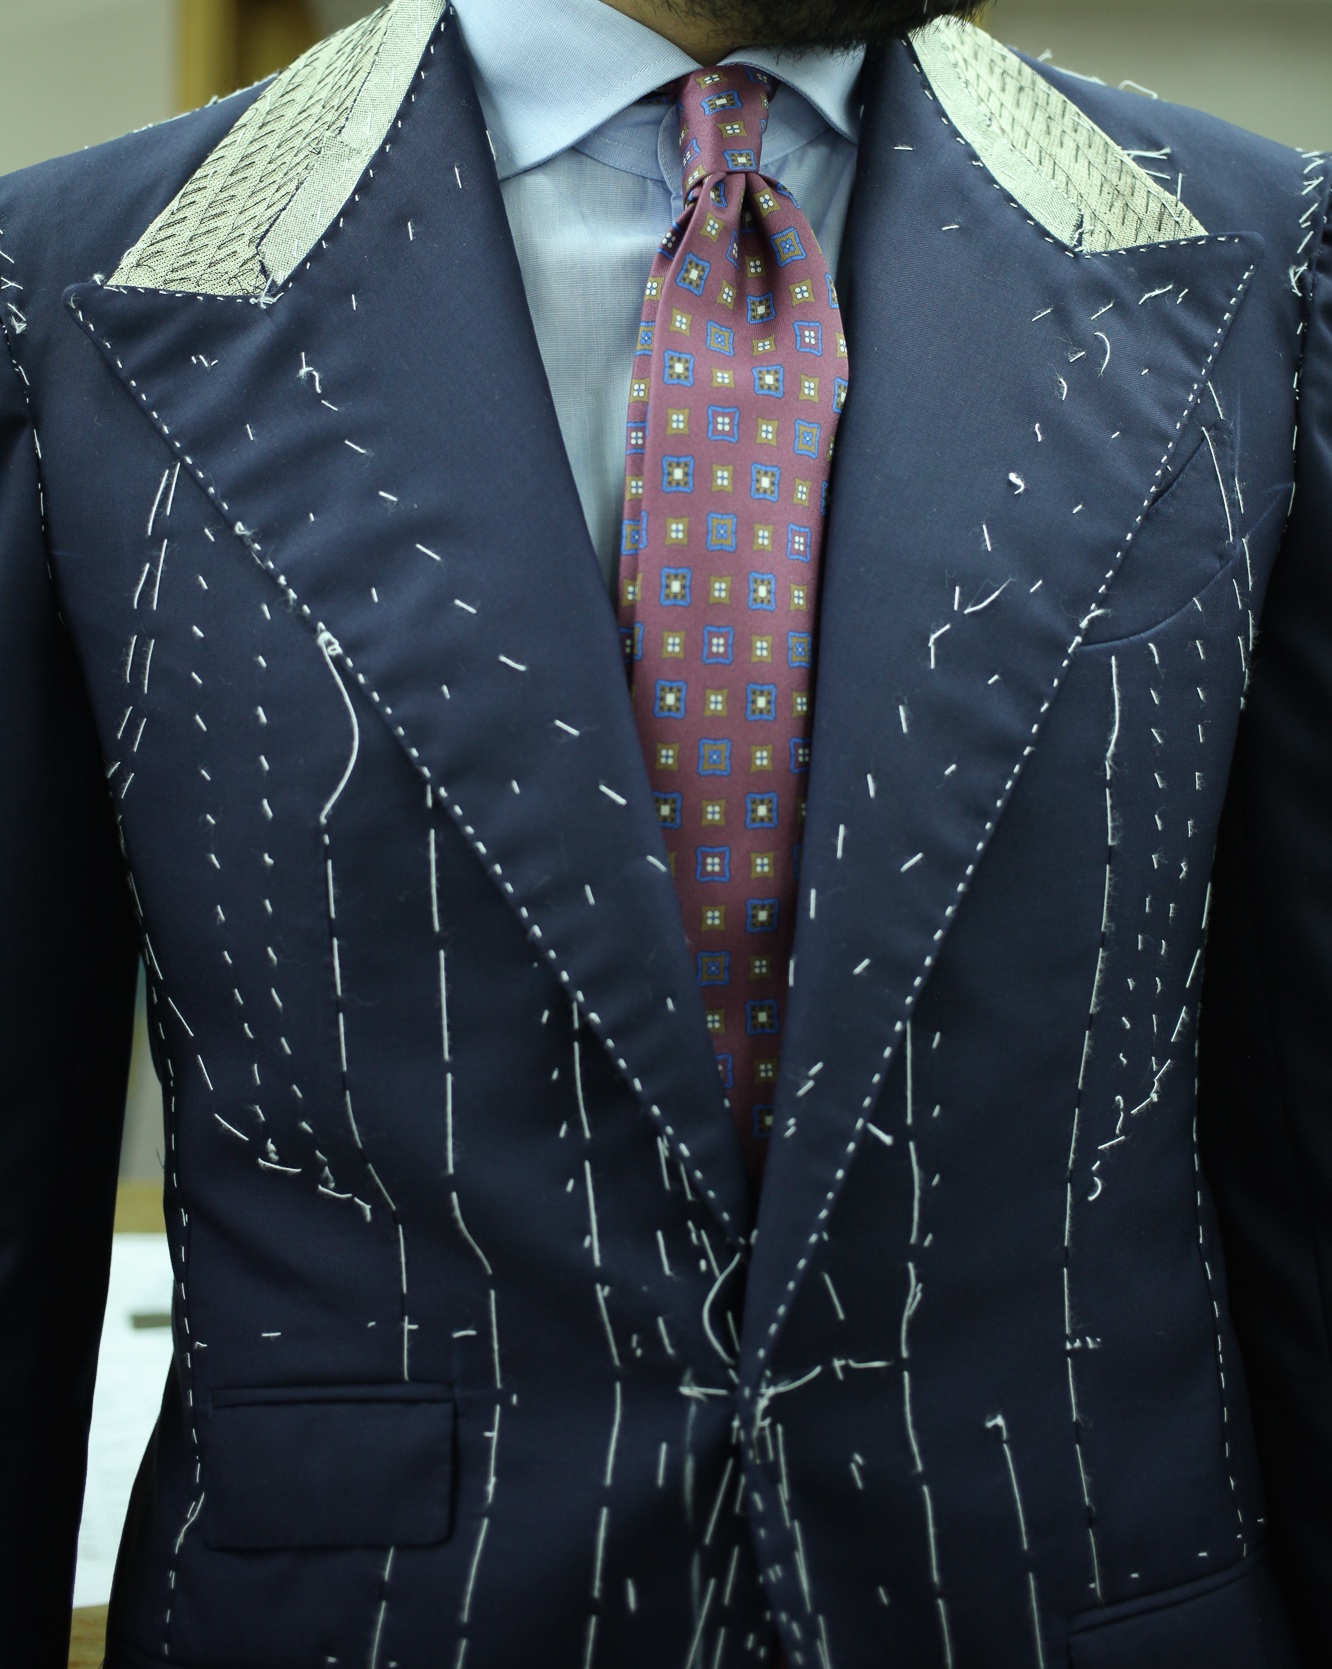 Edesim - Concave Lapel Line Fitting of a three-piece suit made from Holland&Sherry fabric